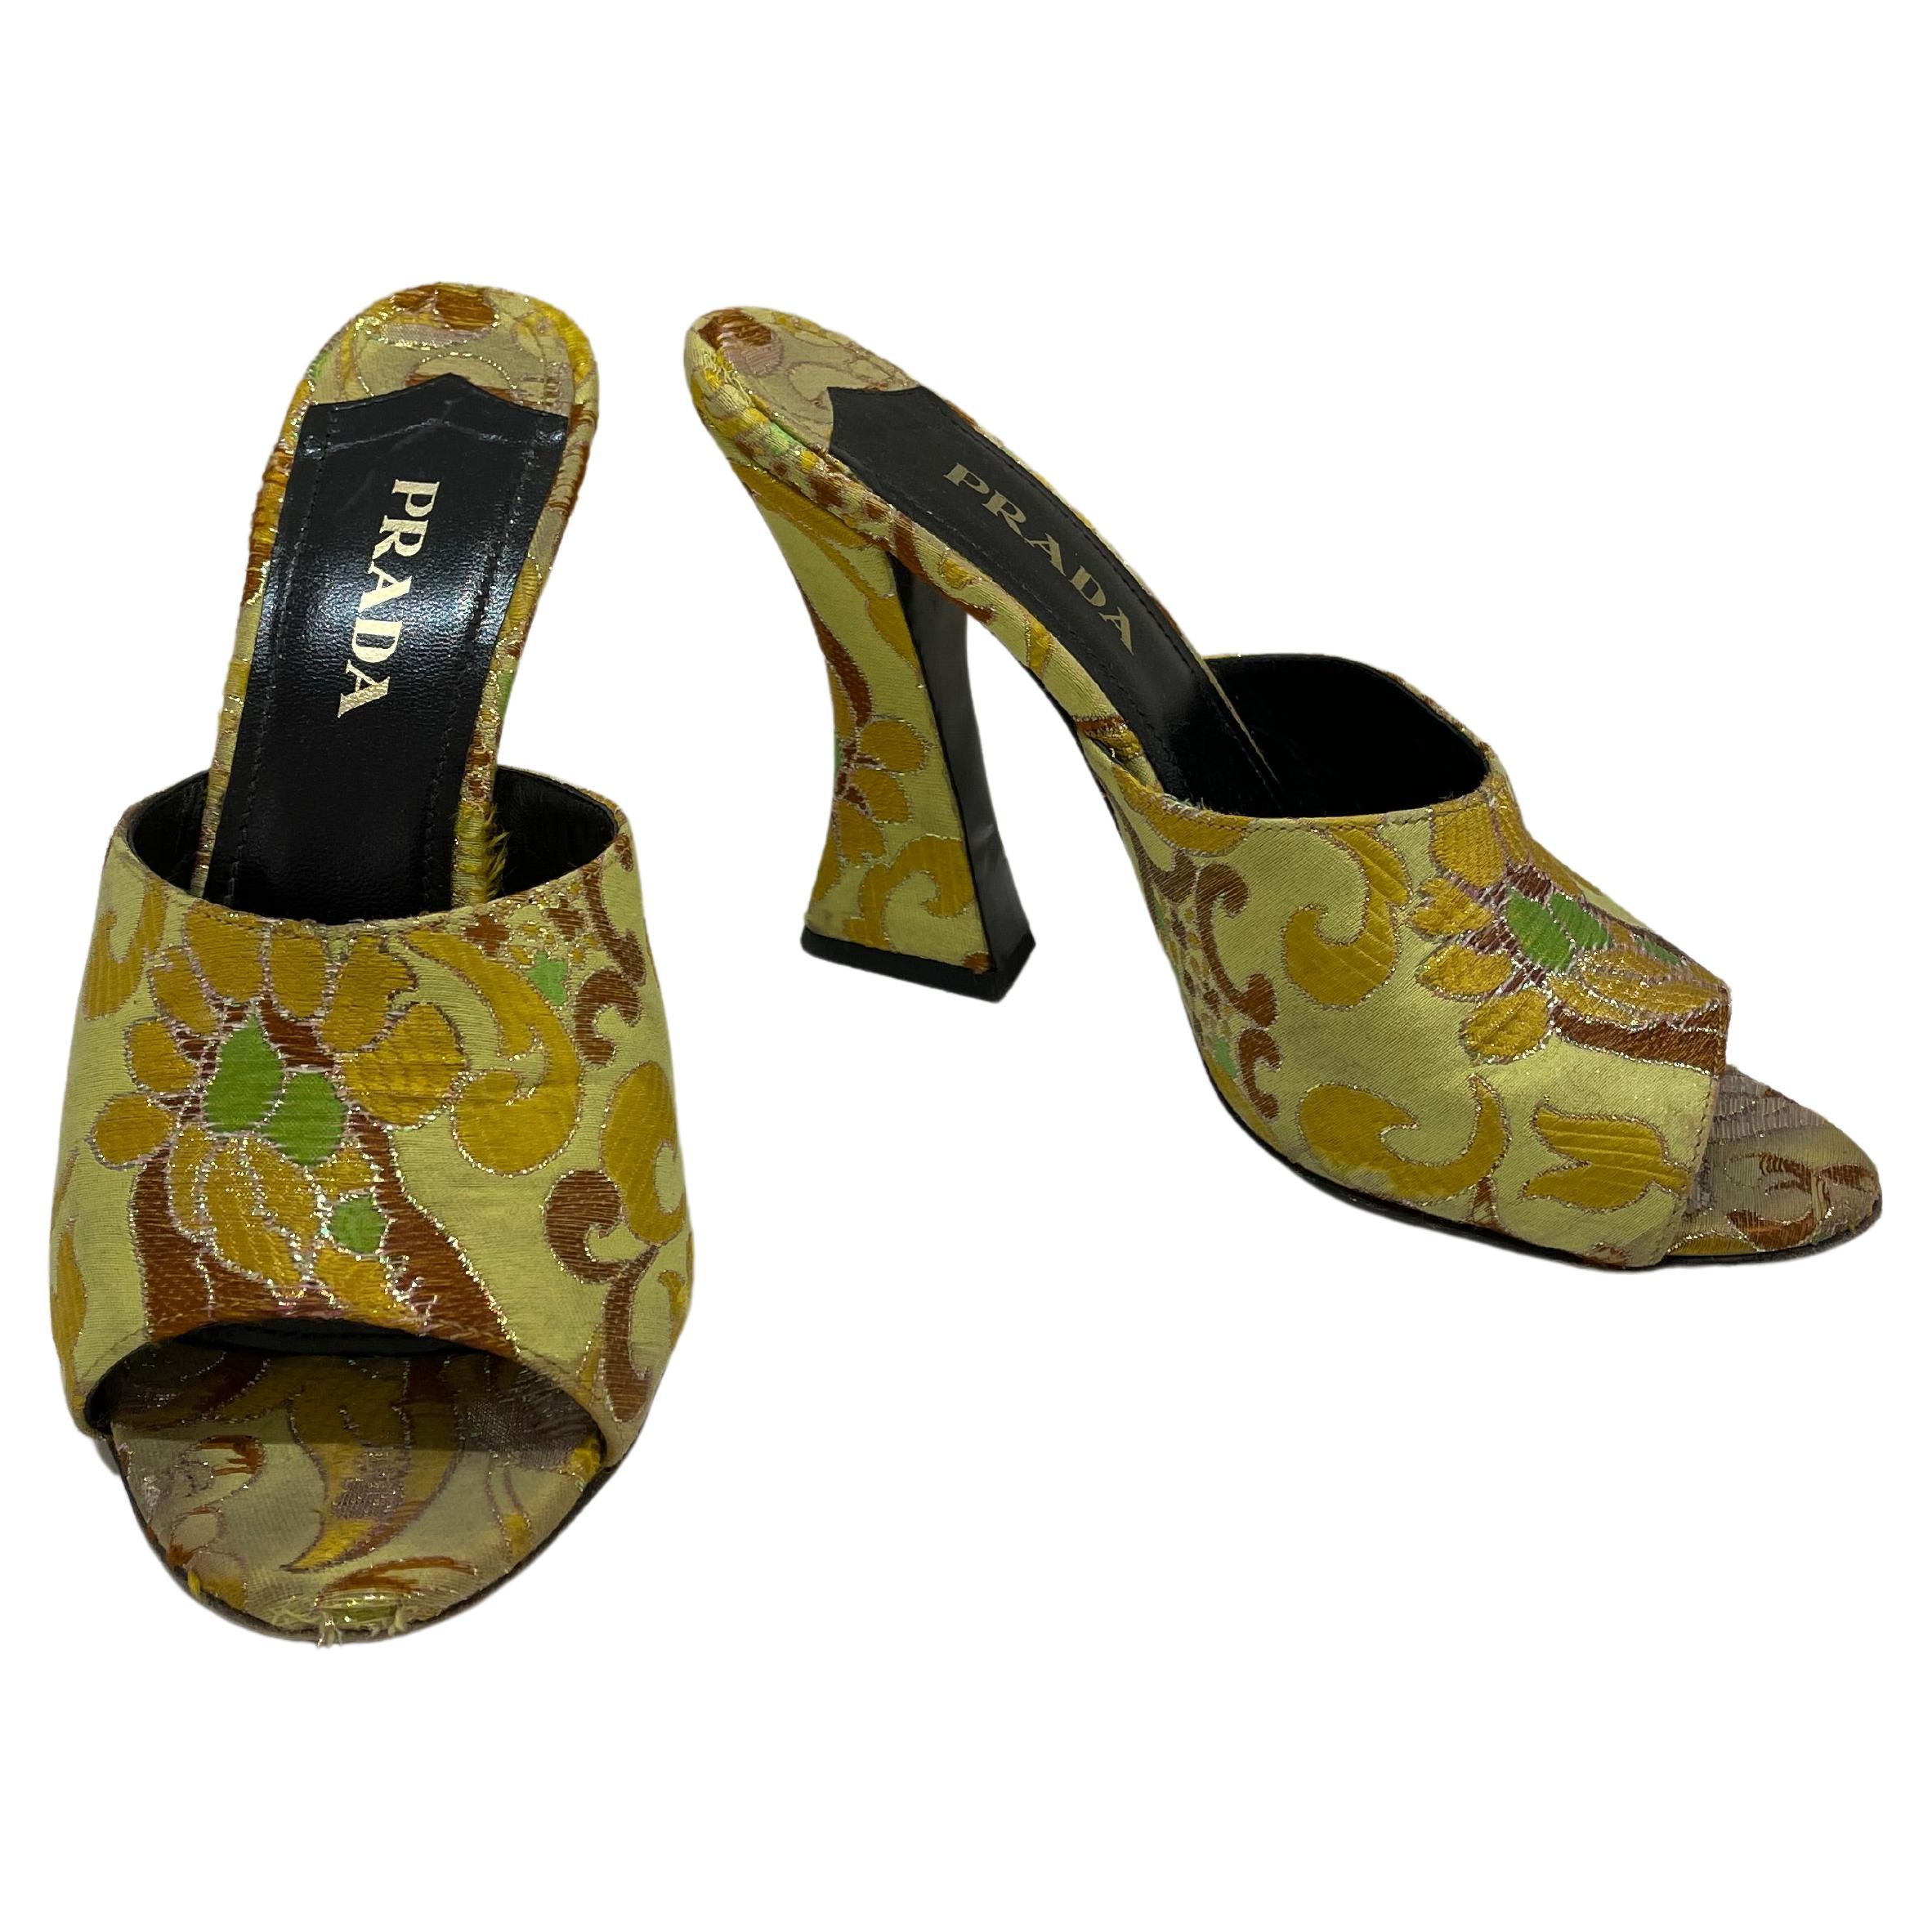 Sabot with Prada heel in damask fabric in shades of yellow. For Sale at  1stDibs